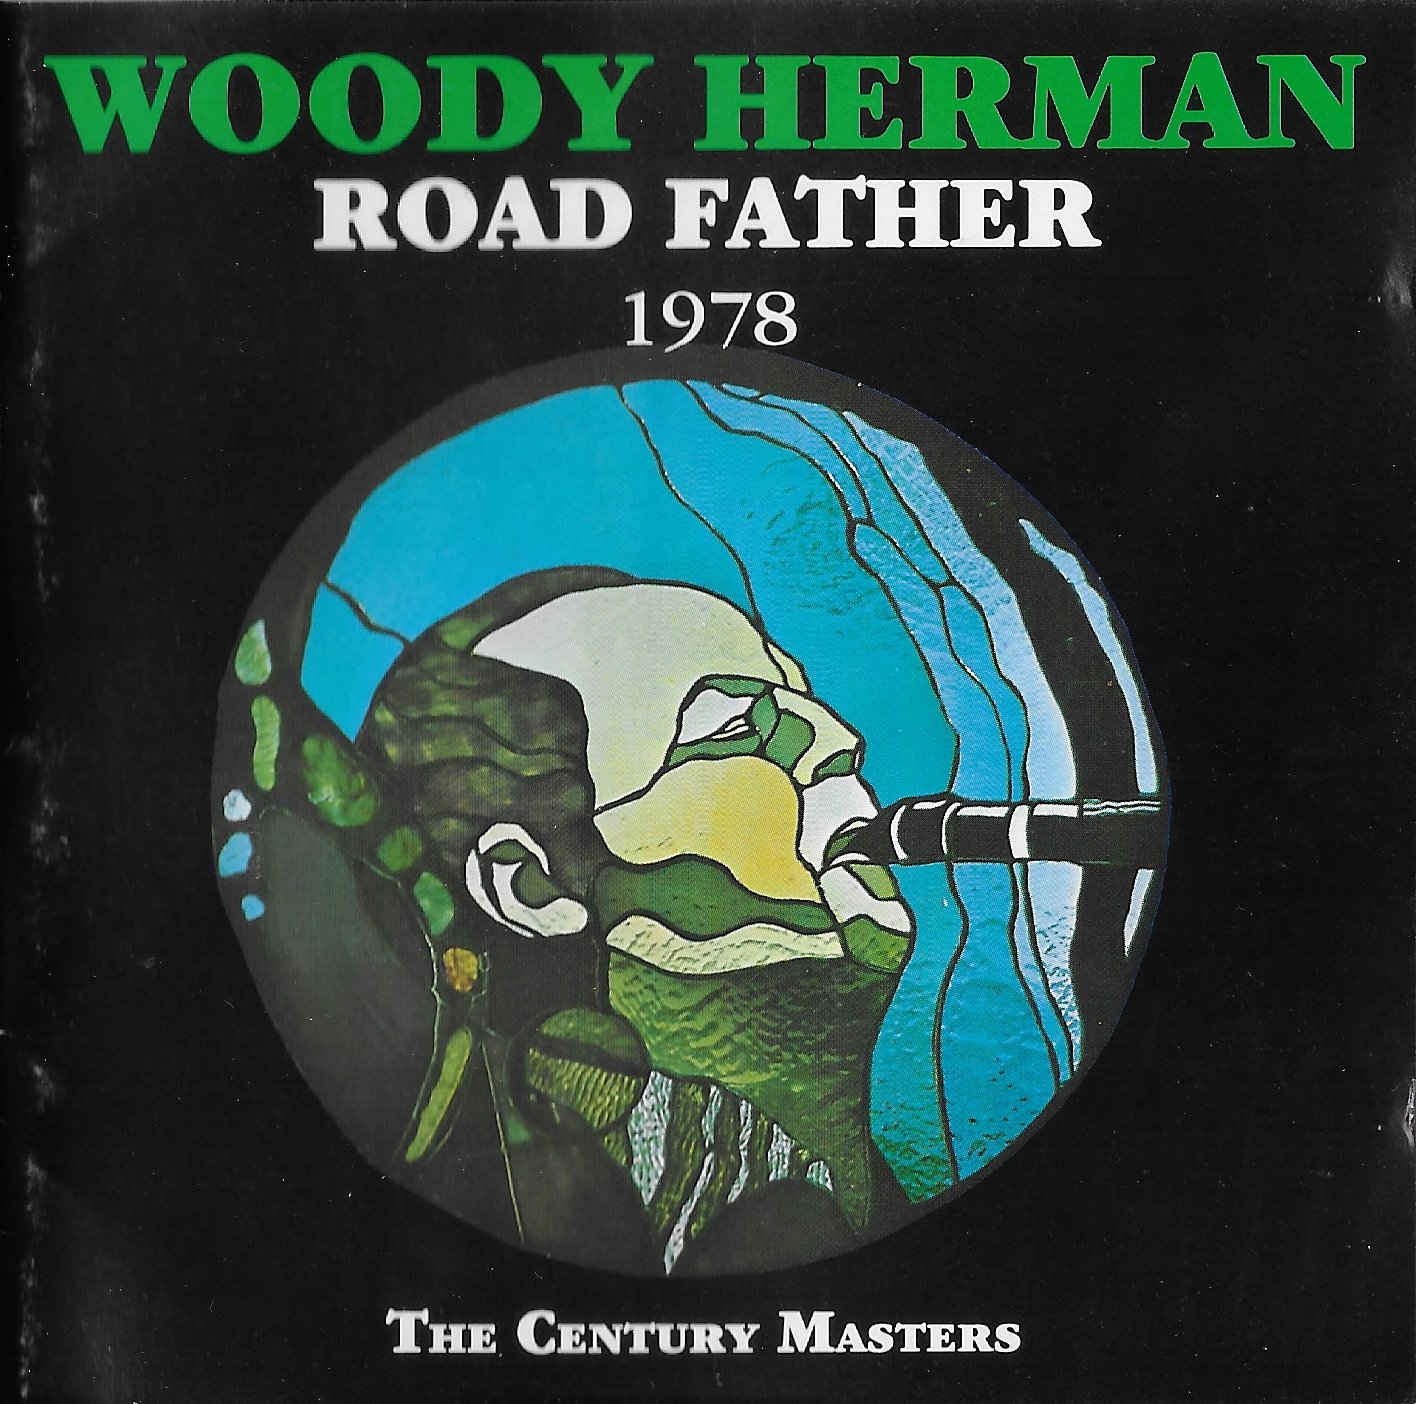 Picture of The Century Catalogue - Road father by artist Woody Herman from the BBC cds - Records and Tapes library